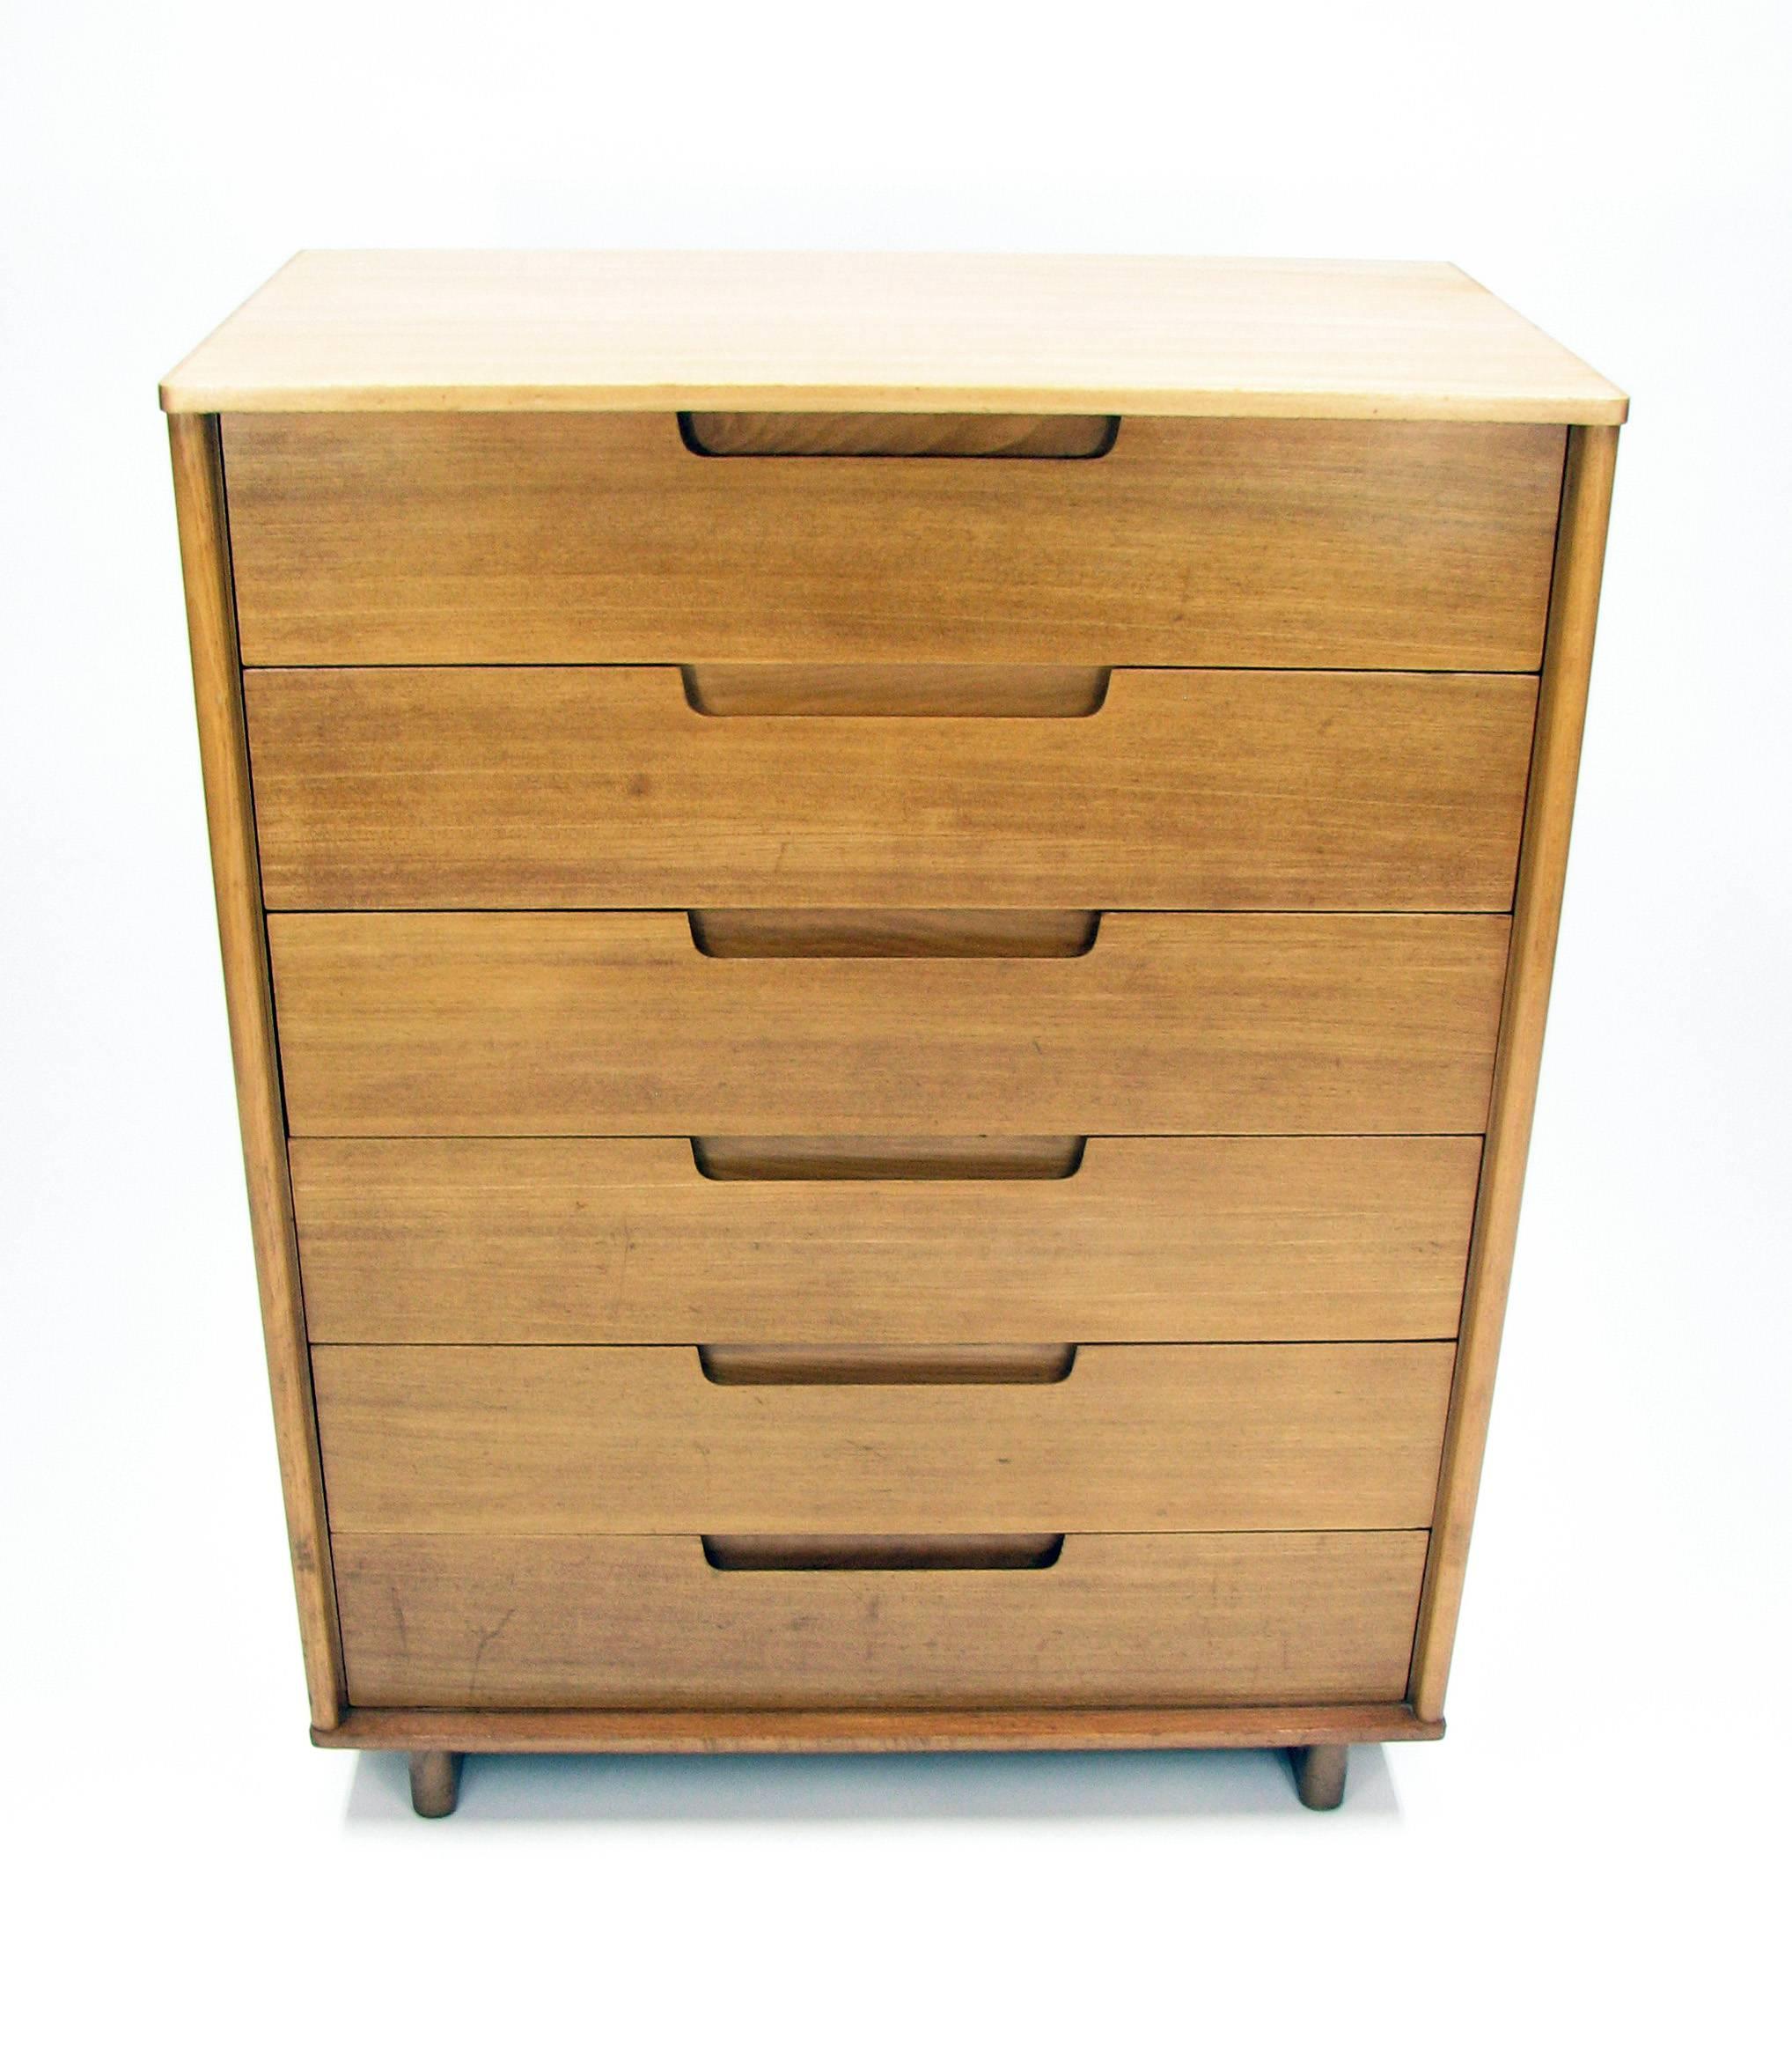 This handsome Mid-Century chest of drawers is an important early piece by Milo Baughman, created for Drexel “Today’s Living” collection. This six-drawer dresser was produced in figured elmwood in 1953 (stamped documentation on the back). The top